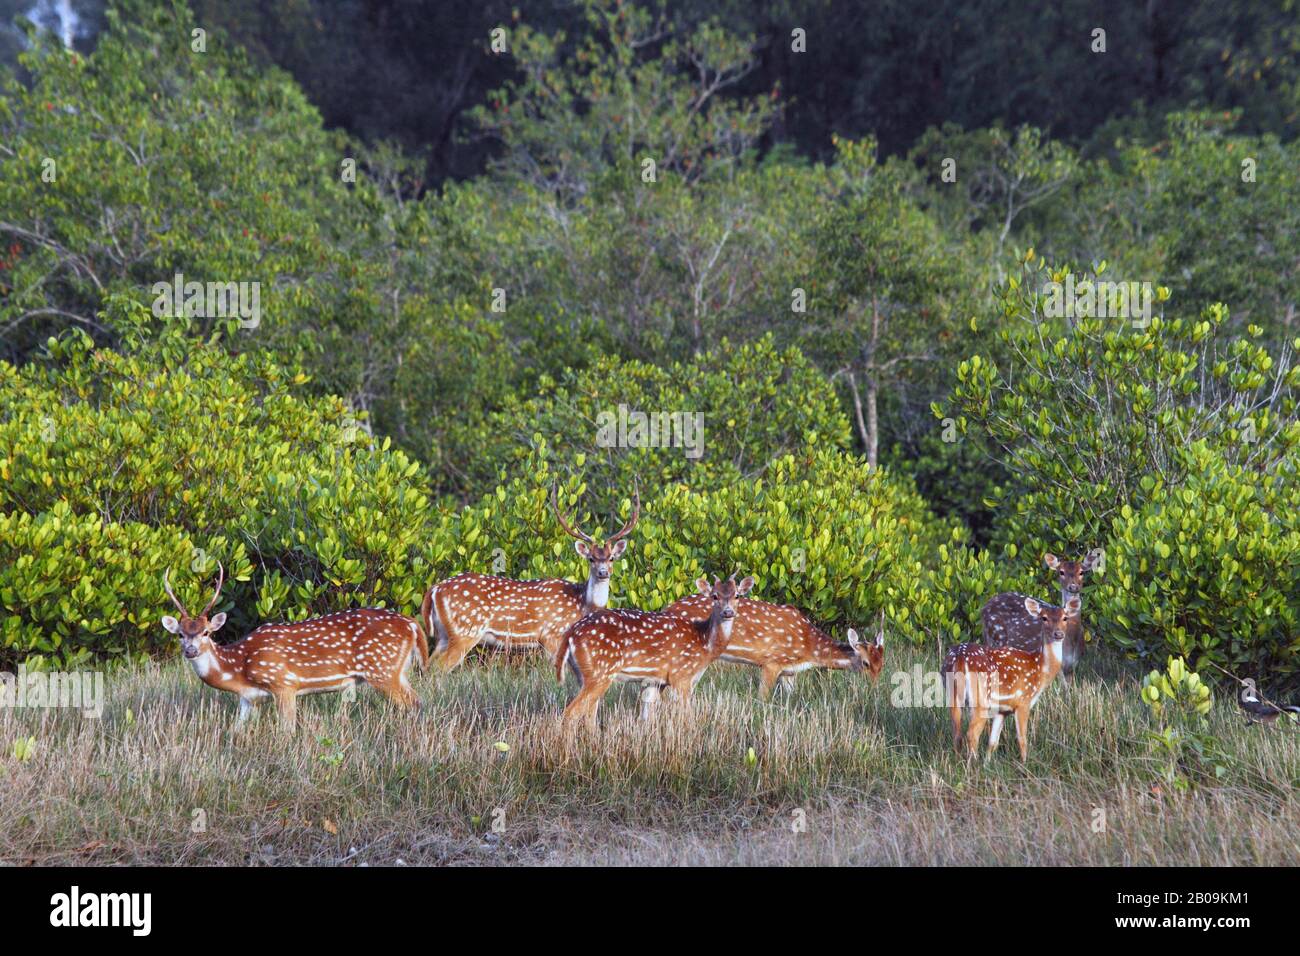 Spotted deer in Sundarban, the largest littoral mangrove forest in the world. Khulna, Bangladesh. April 2011. Stock Photo